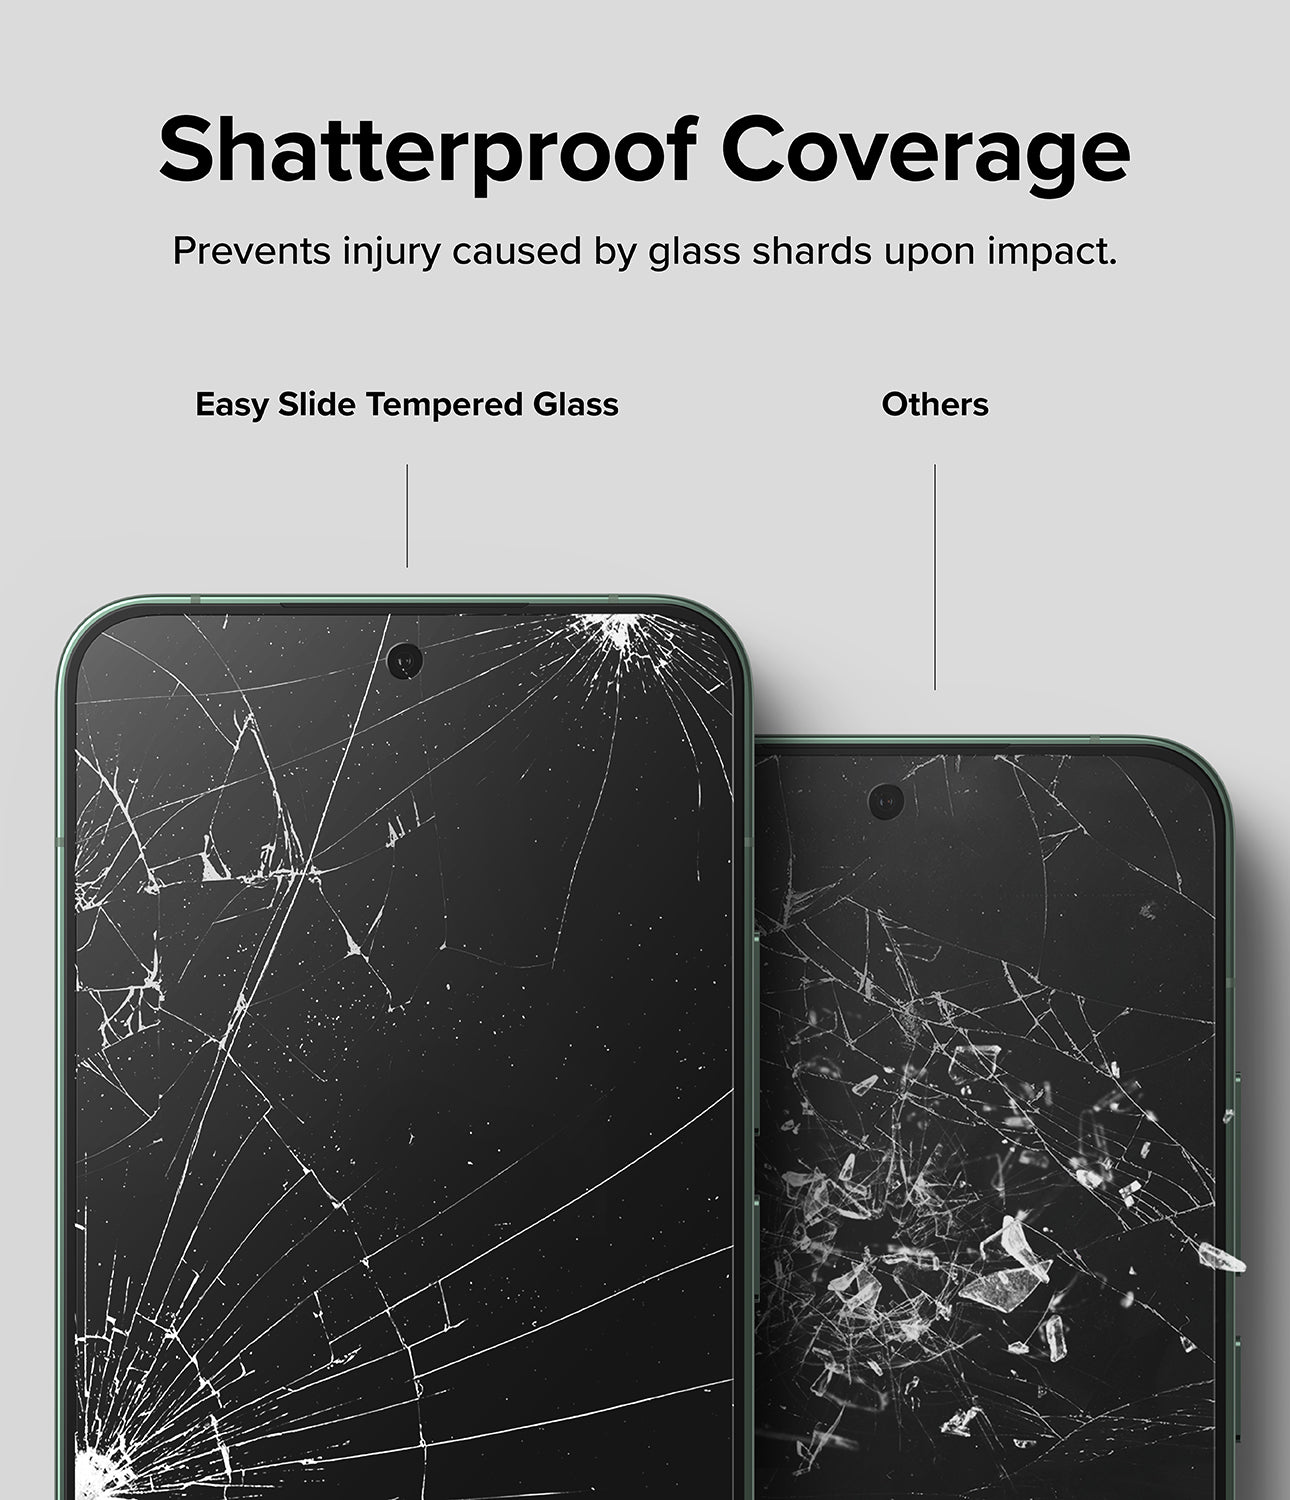 Xiaomi 14 Screen Protector | Easy Slide Tempered Glass - Shatterproof Coverage